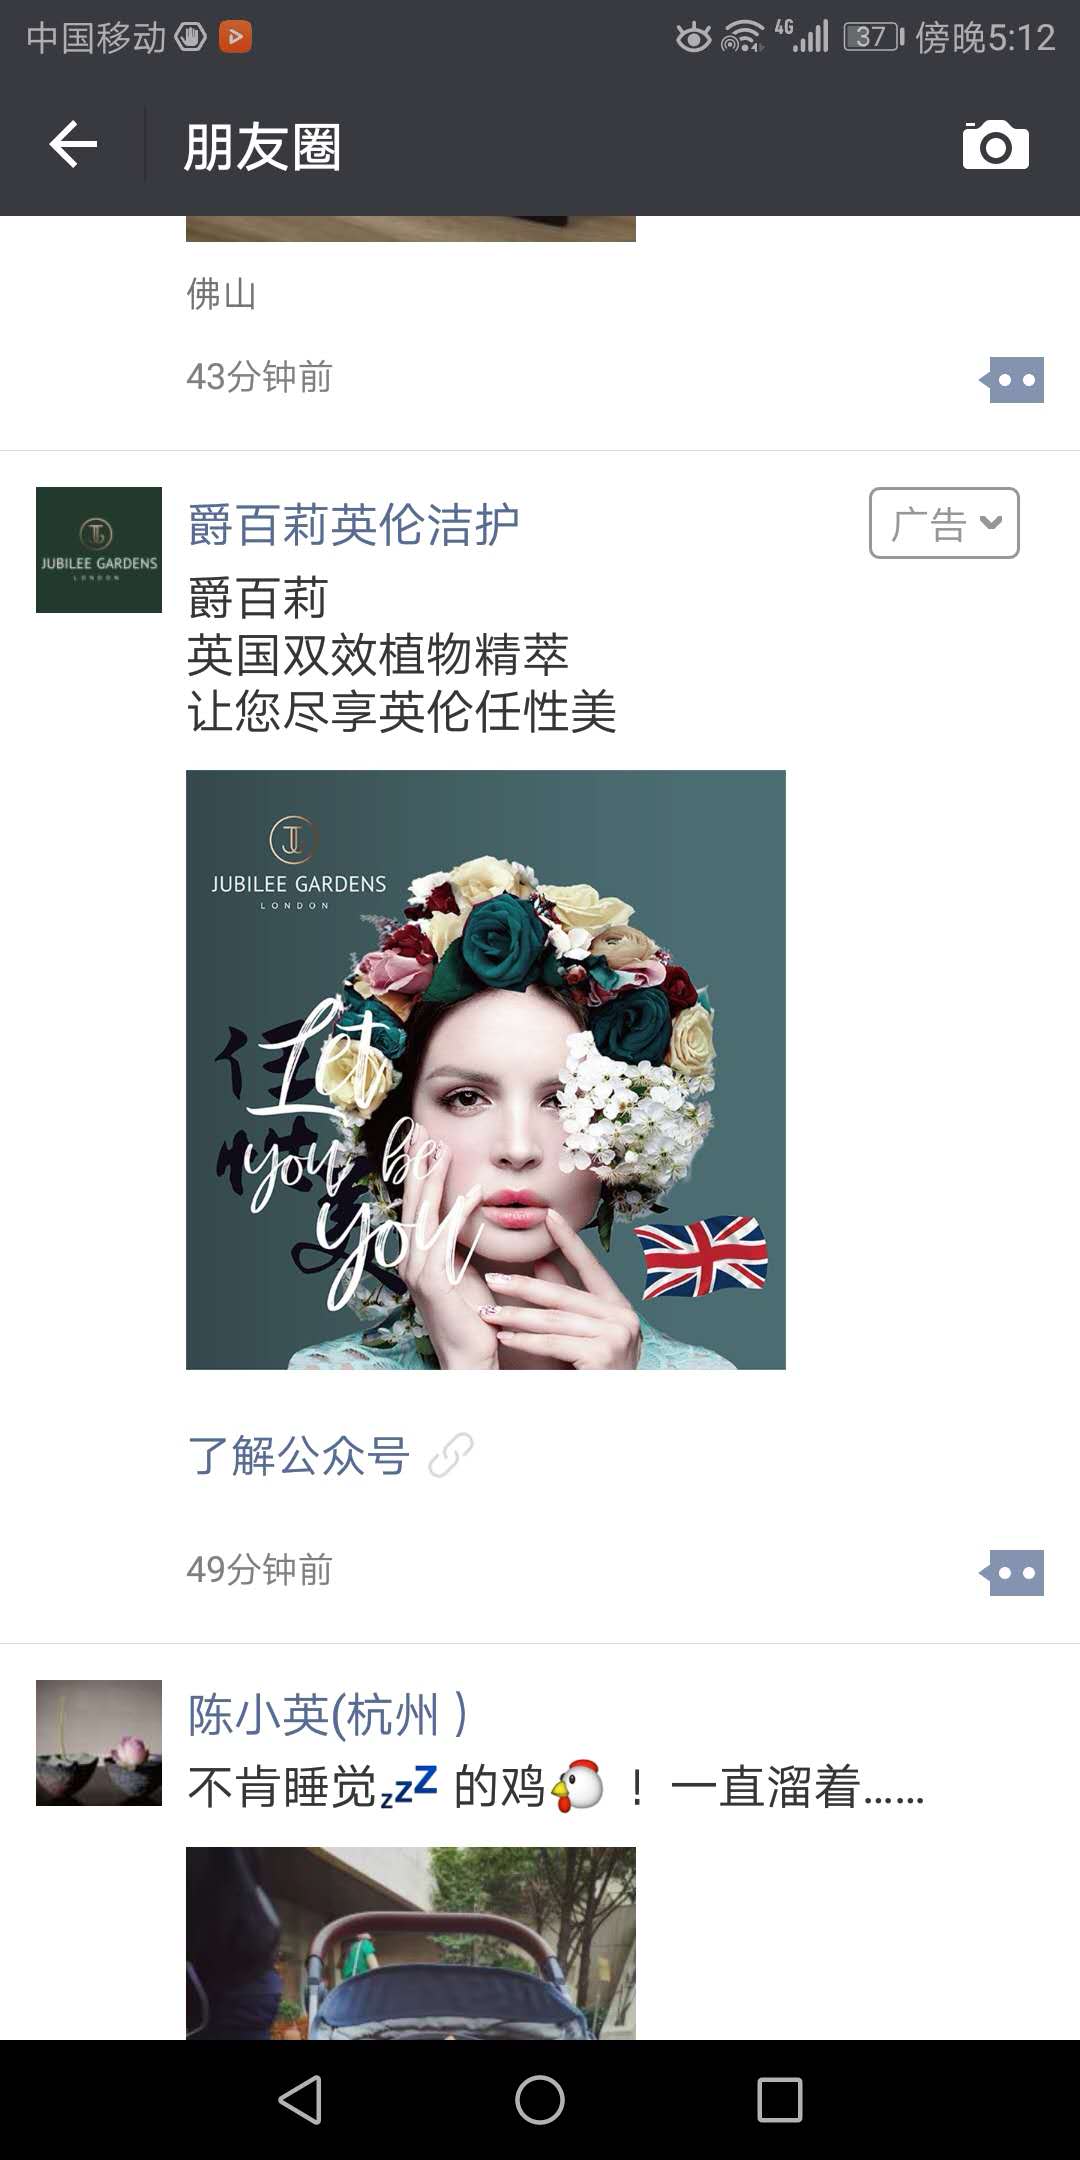 Jubilee Gardens’ latest WeChat campaign